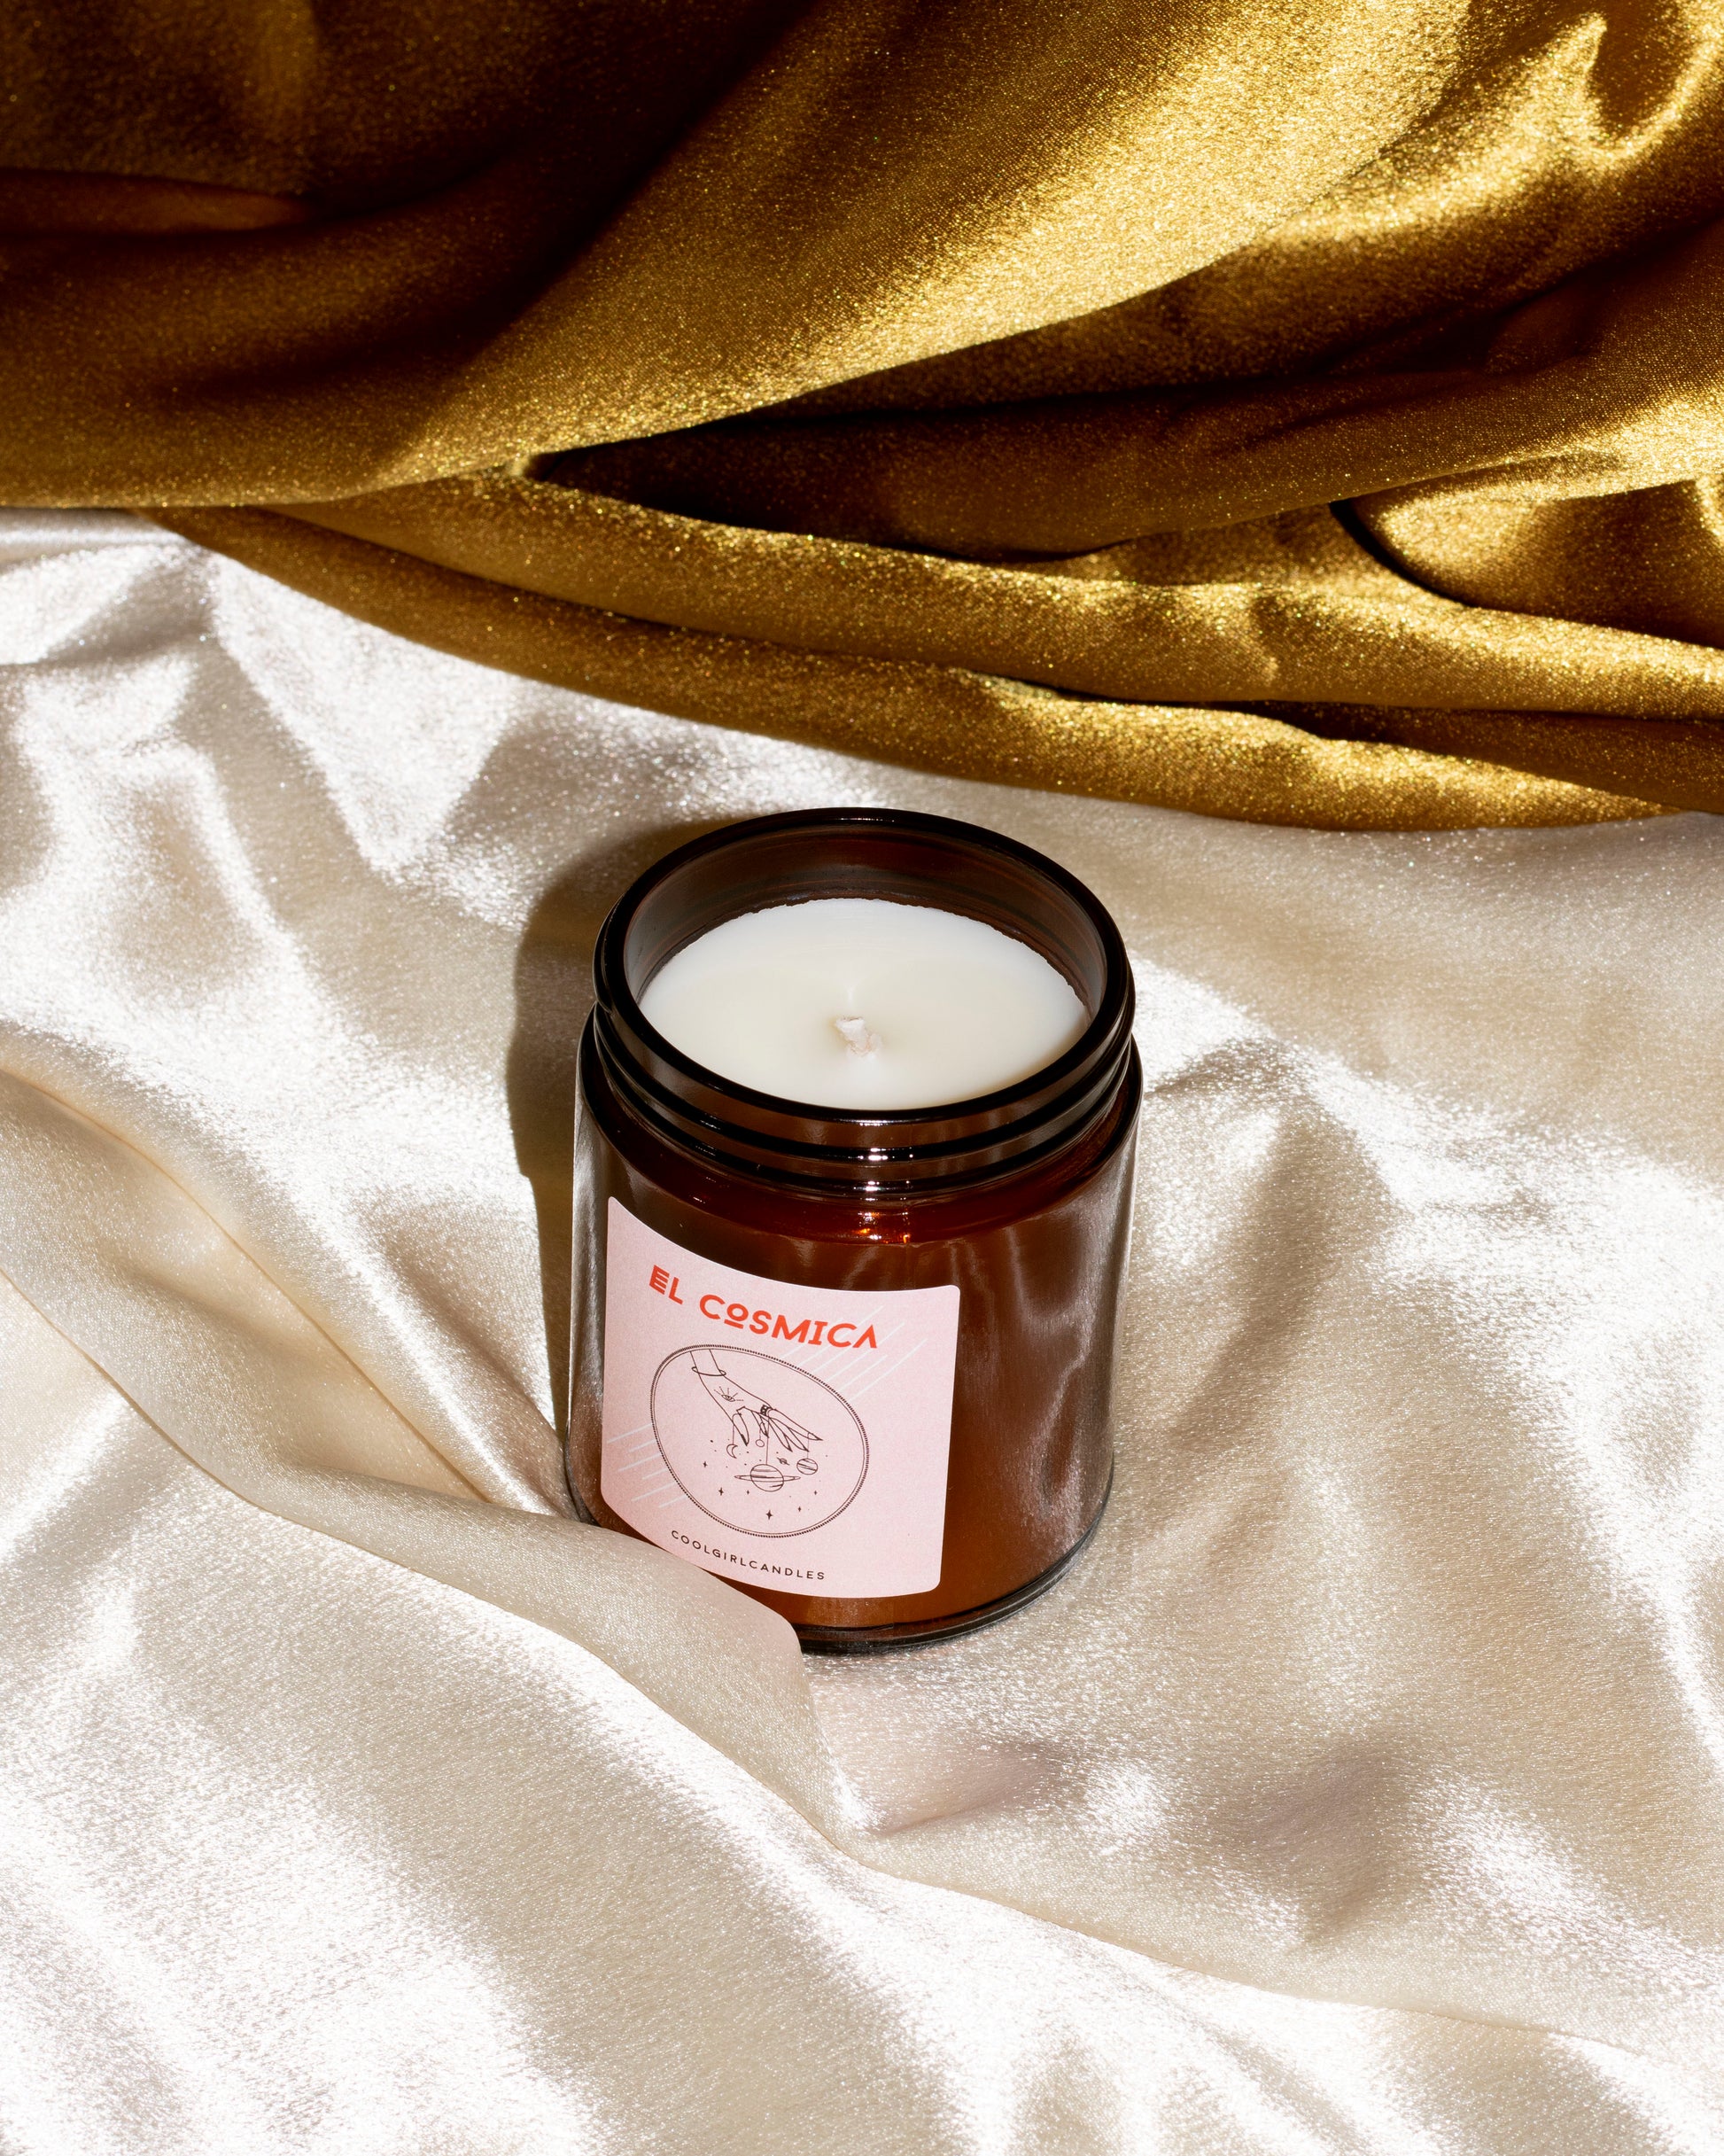 Fall Winter 2020 scented candle with notes of apple, saffron, blackberries, anise, amber, wood patchouli